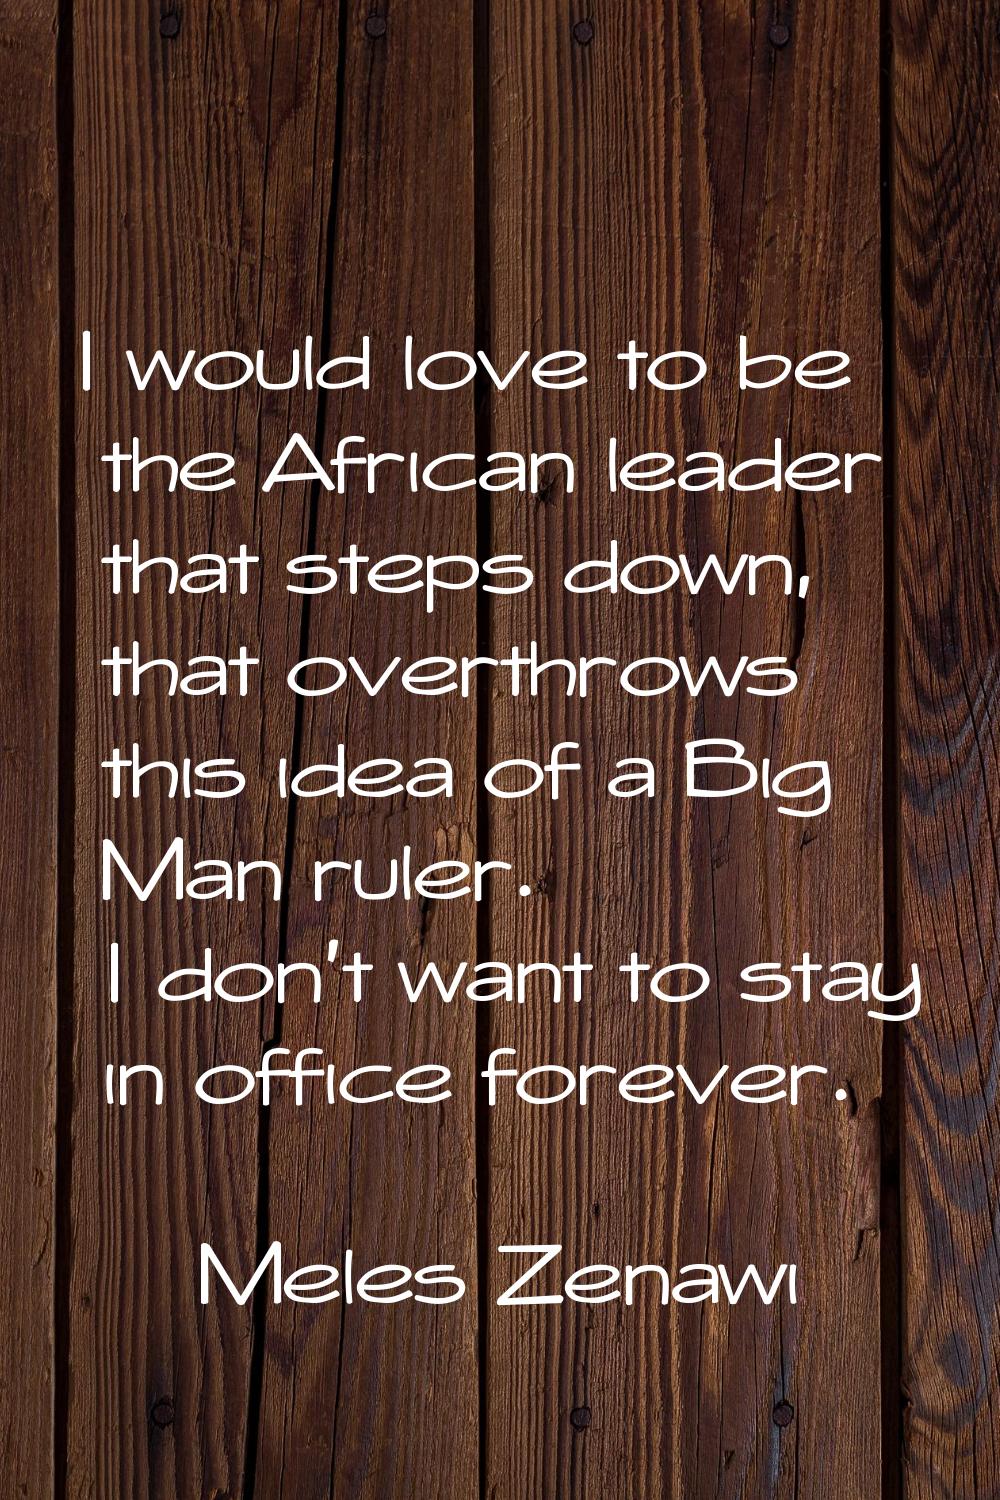 I would love to be the African leader that steps down, that overthrows this idea of a Big Man ruler